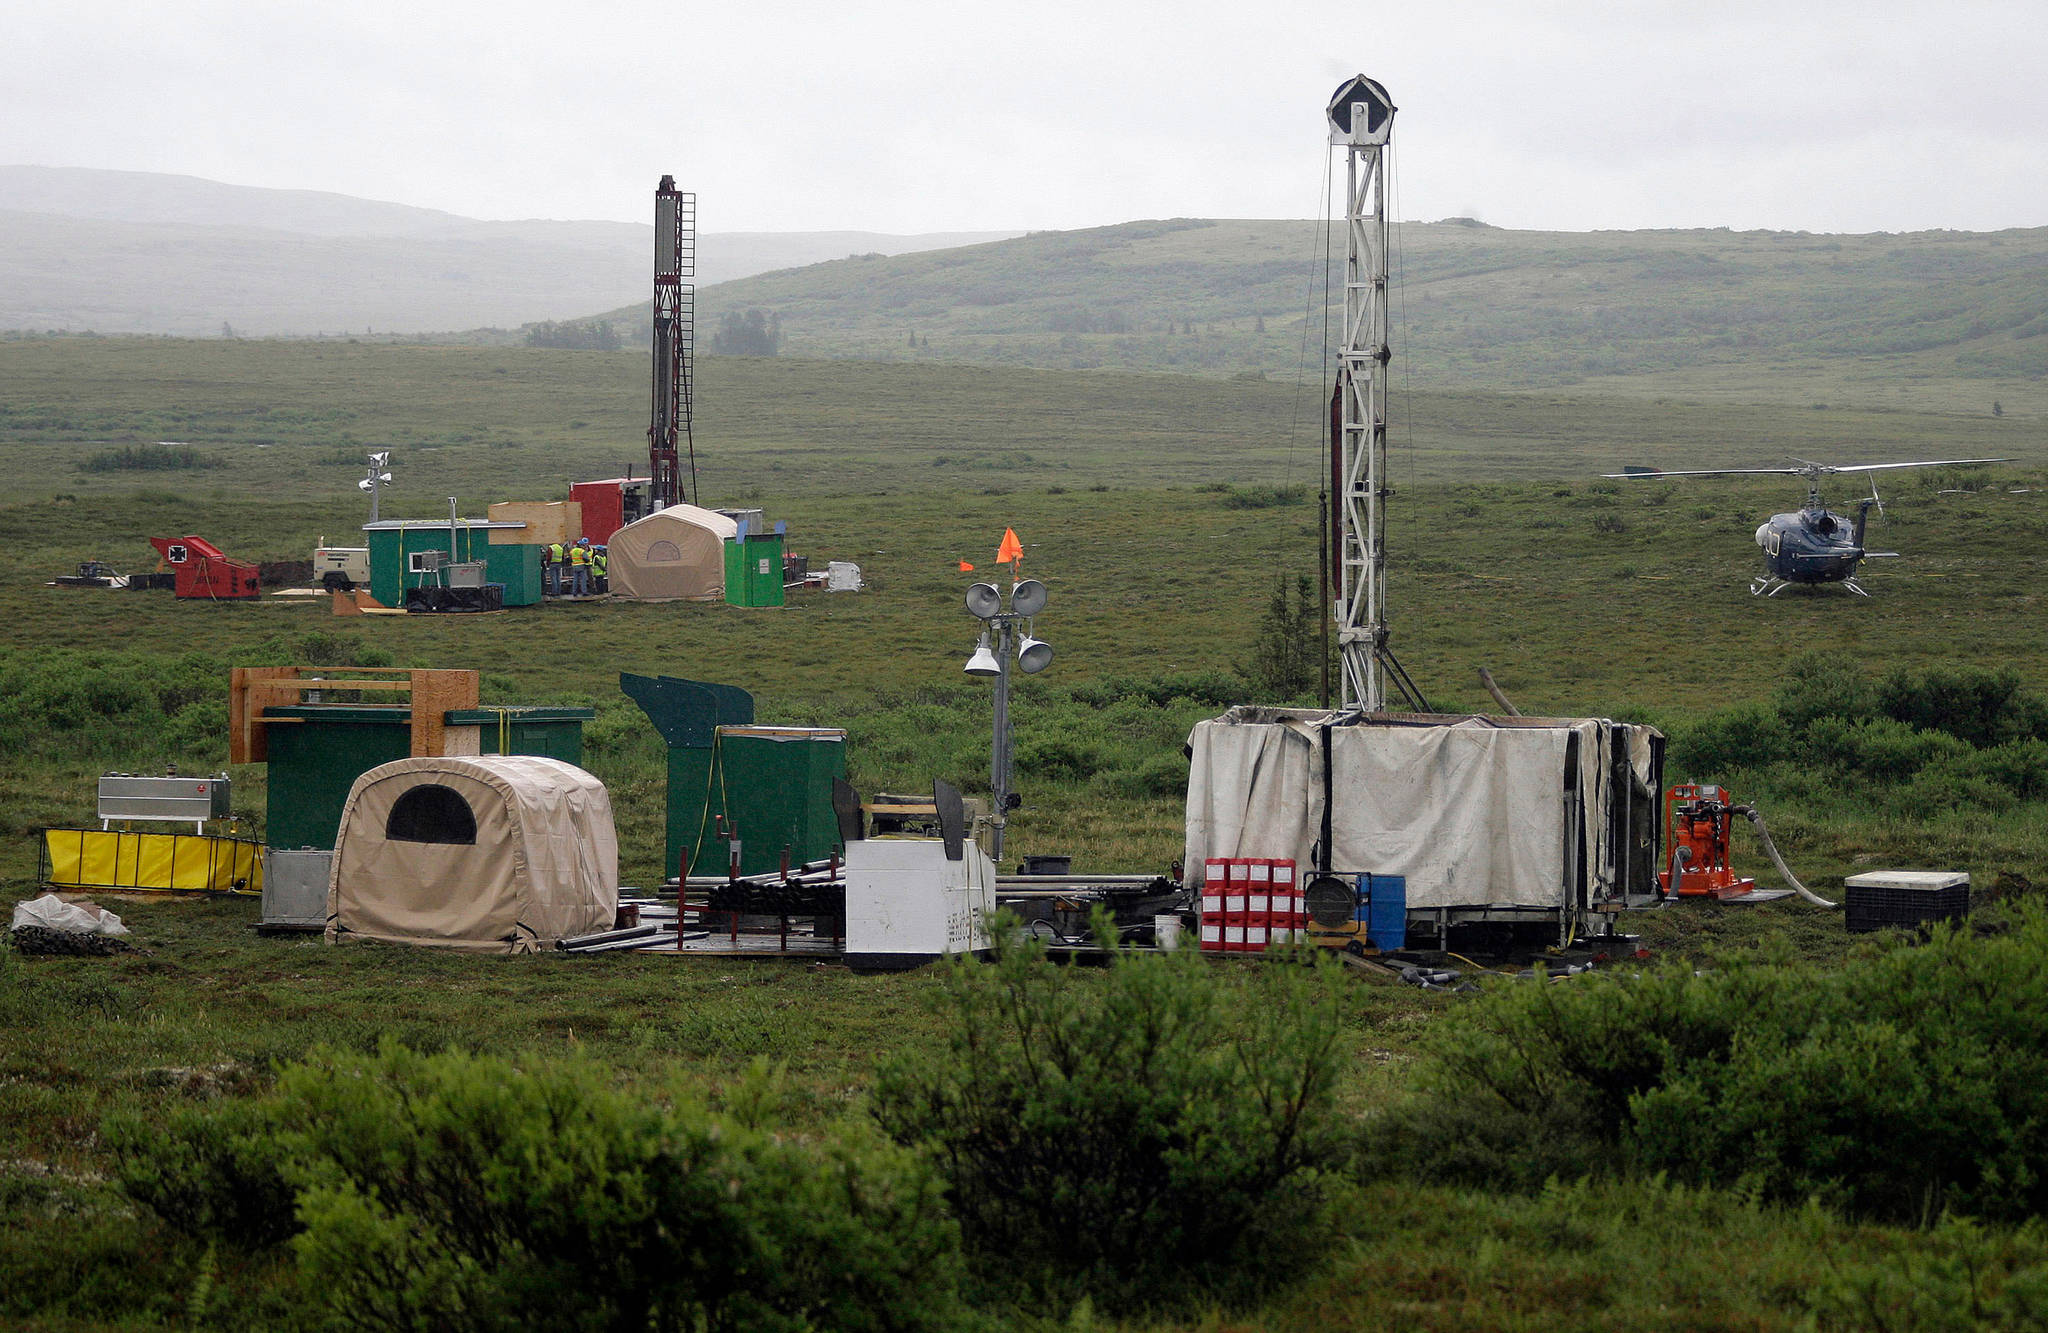 In this July 2007 photo, workers with the Pebble Mine project test drill in the Bristol Bay region of Alaska, near the village of Iliamma. The Pebble Limited Partnership, which wants to build a copper and gold mine near the headwaters of a major U.S. salmon fishery in southwest Alaska, says it plans to offer residents in the region a dividend. (AP Photo/Al Grillo, File)